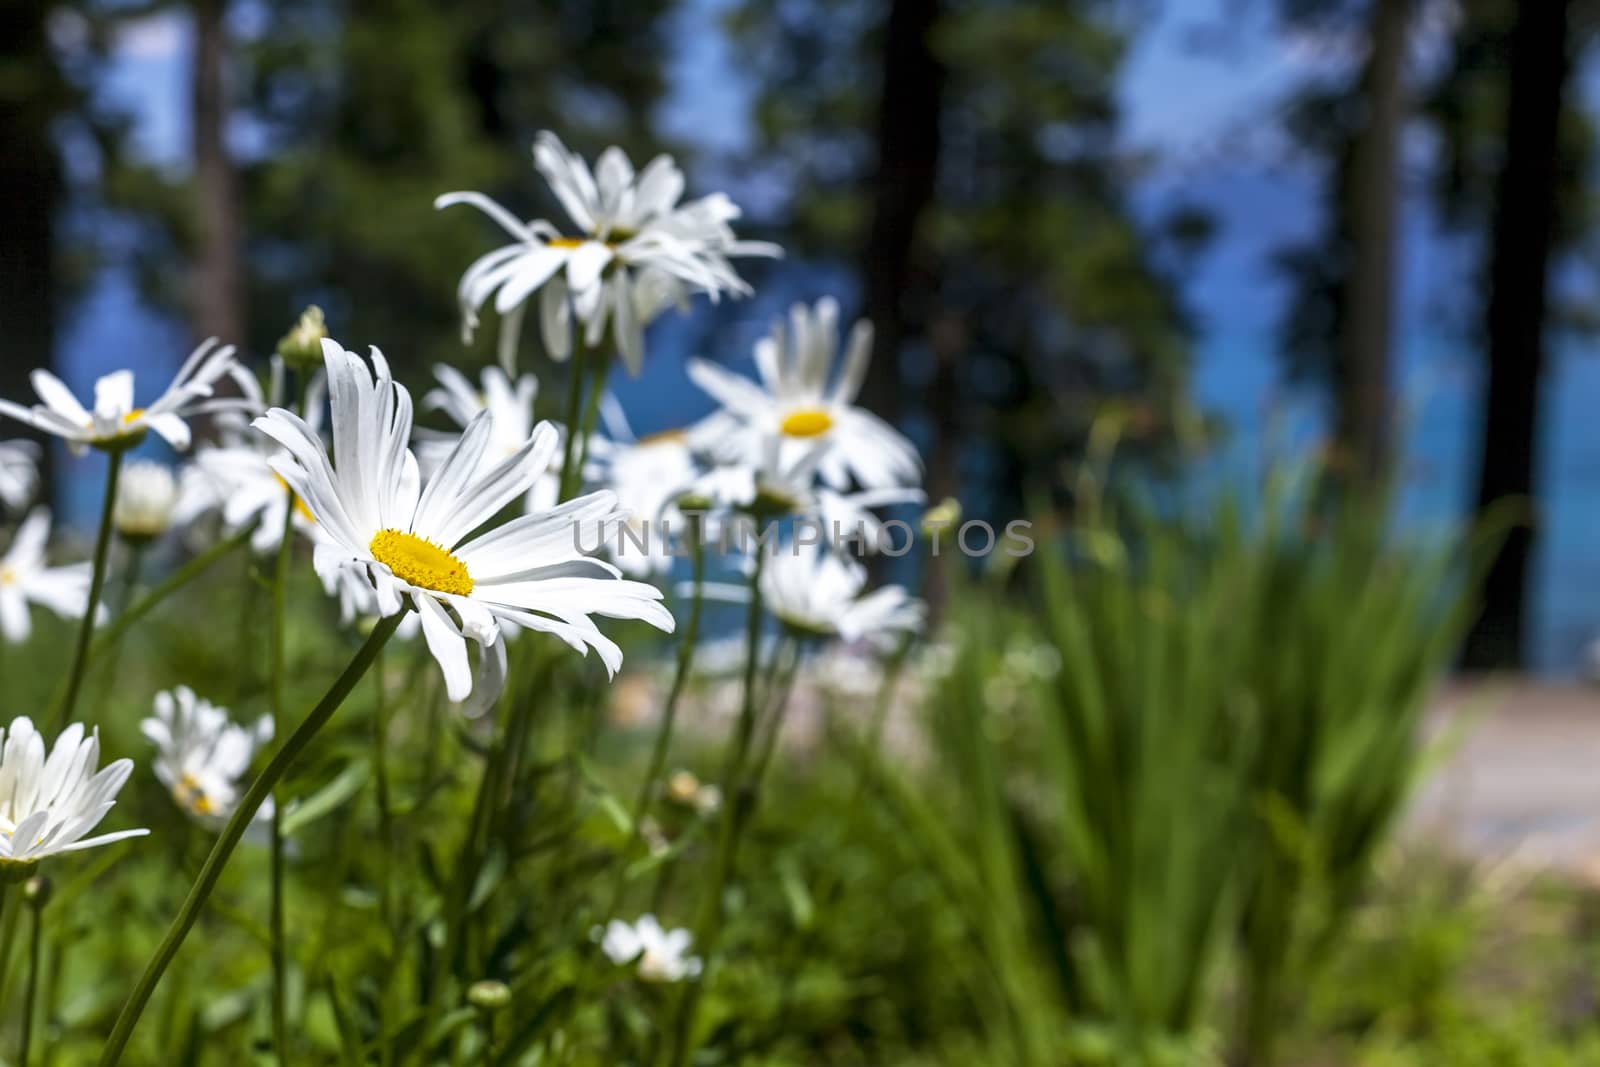 Image taken a Sugar Pine state park in Lake Tahoe, California in the spring time why the daisies were in bloom.